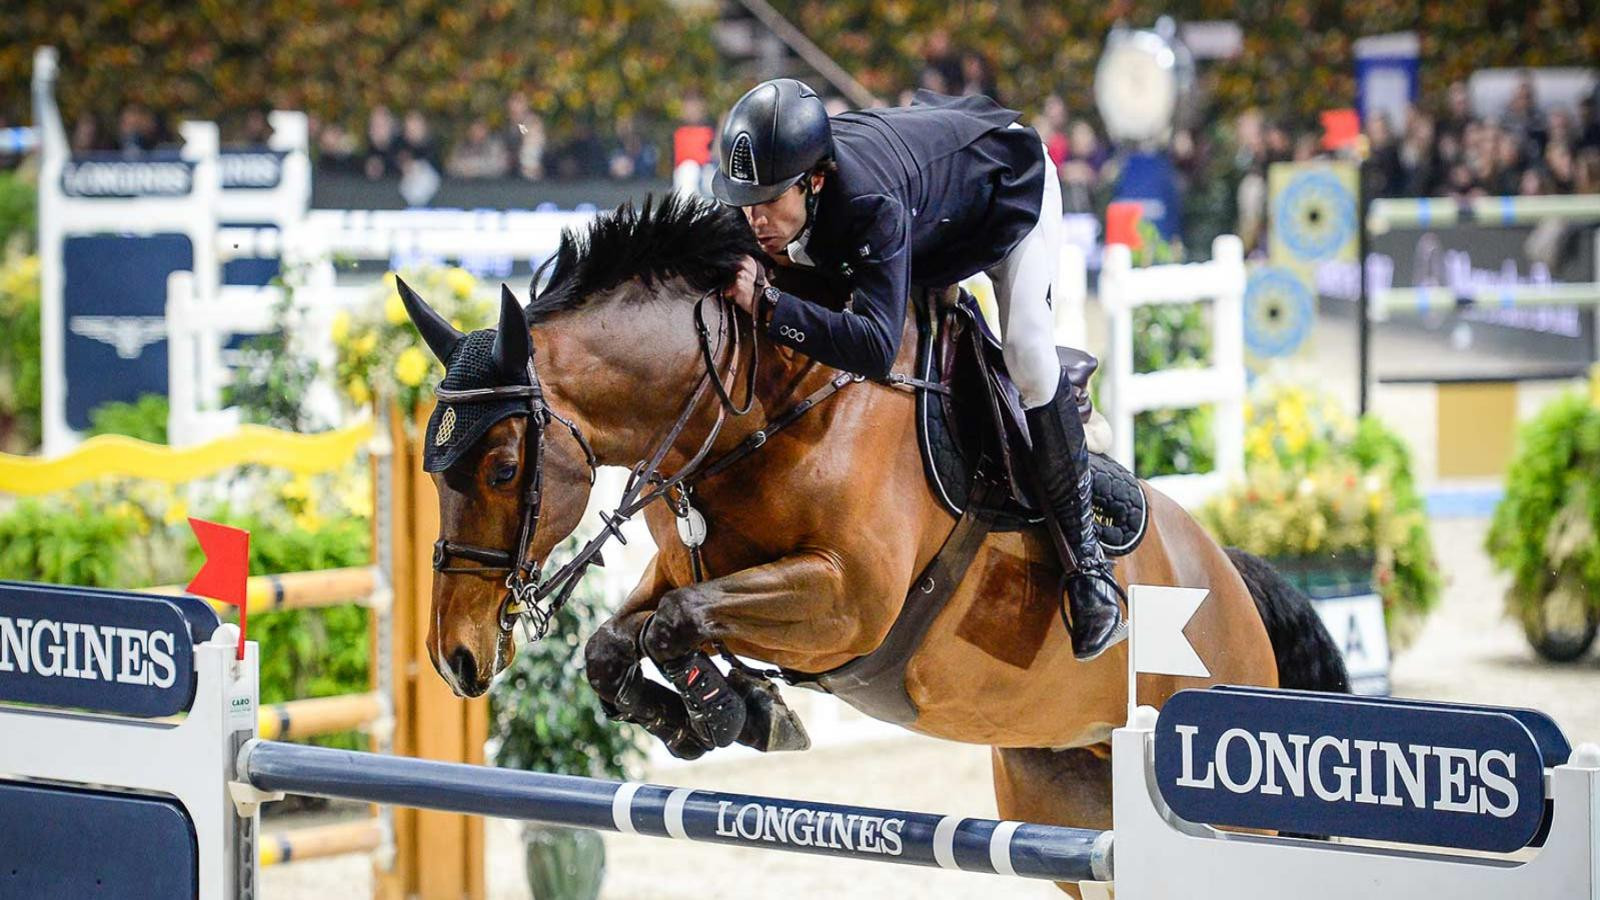 Zurich is set to host an FEI World Cup Jumping Western European League event for the final time this weekend ©Longines